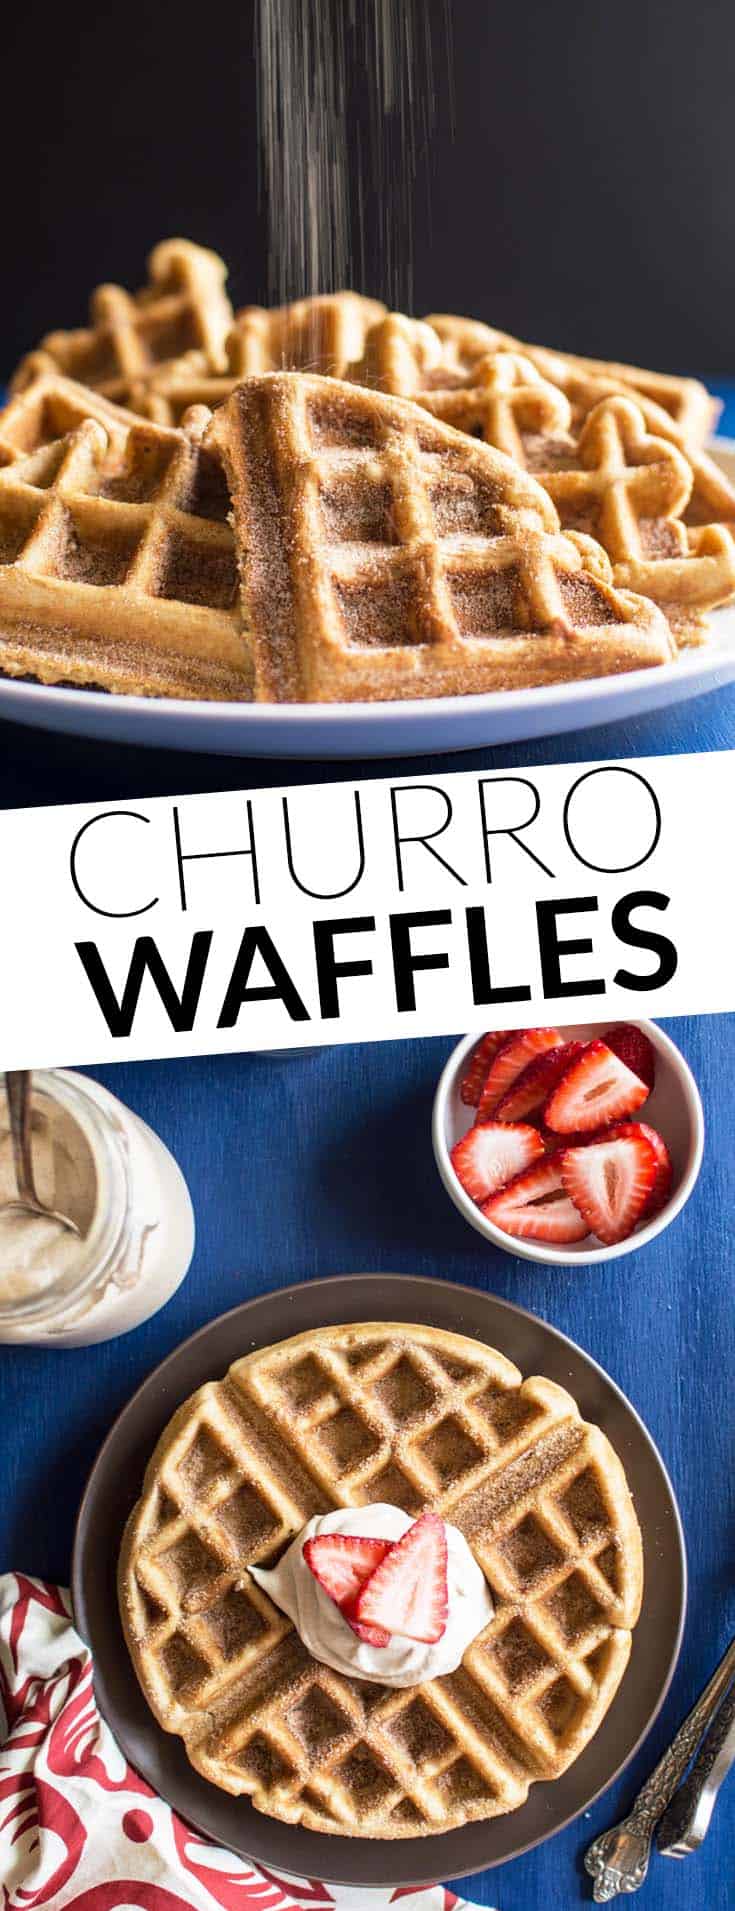 Churro Waffles with Cayenne Whipped Cream - perfect for lunch! @healthynibs